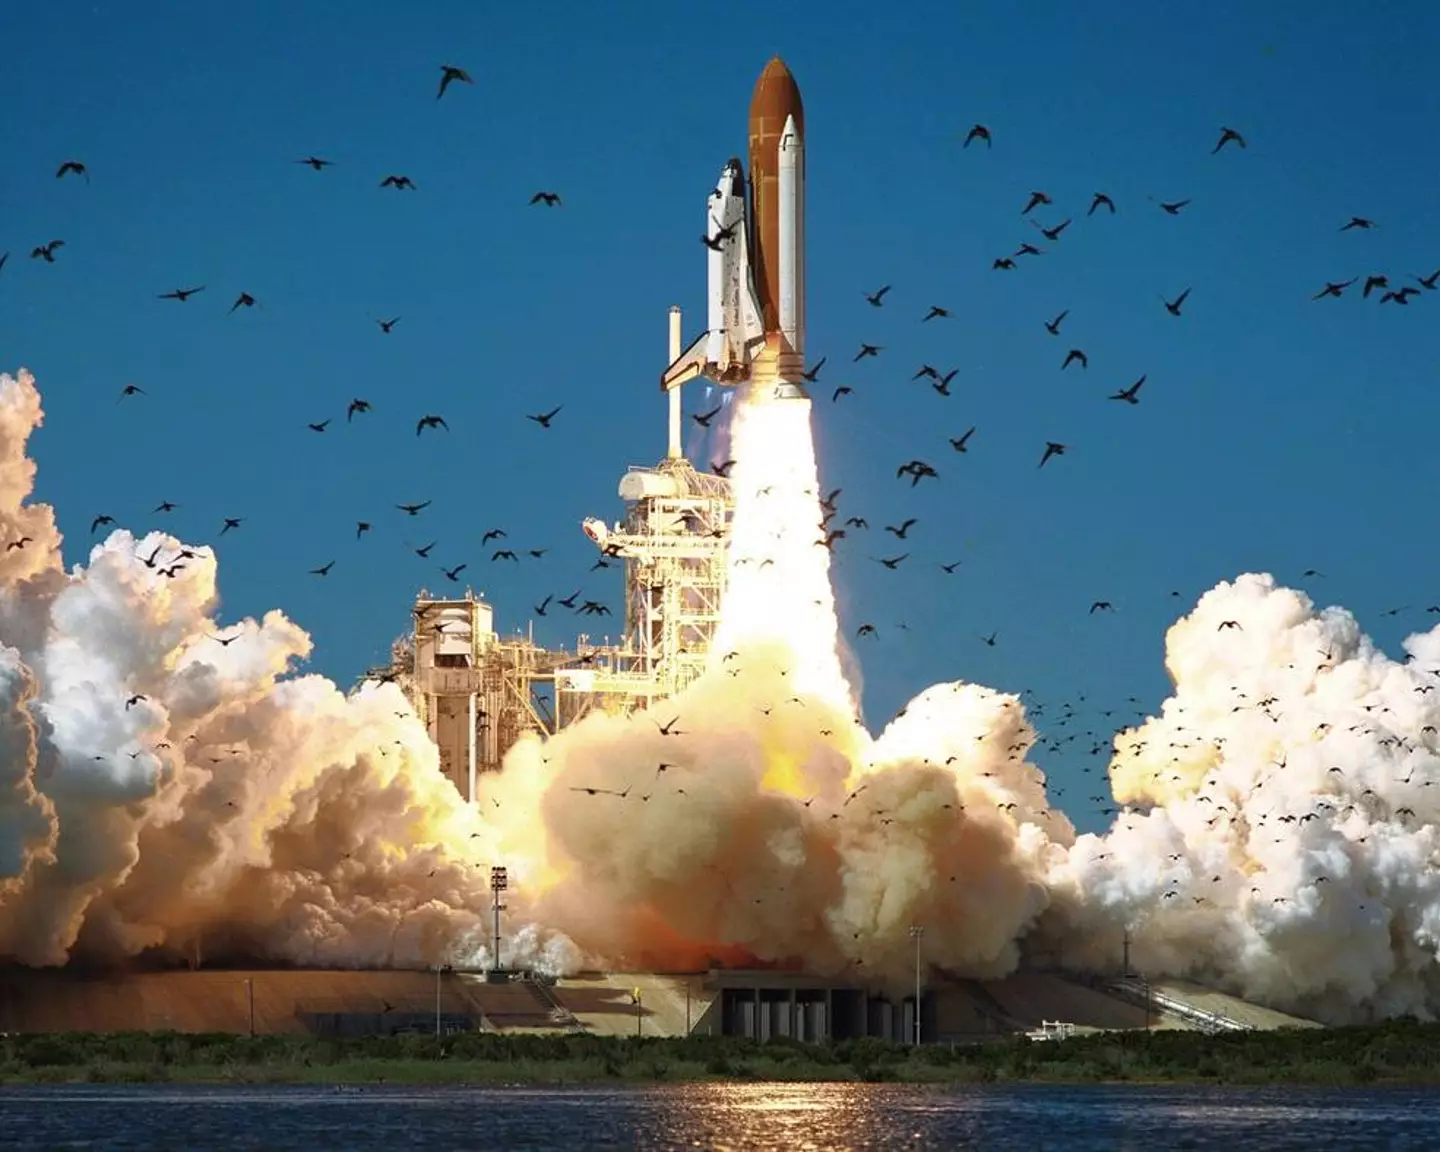 The Challenger shuttle exploded 73 seconds into its flight in 1986.